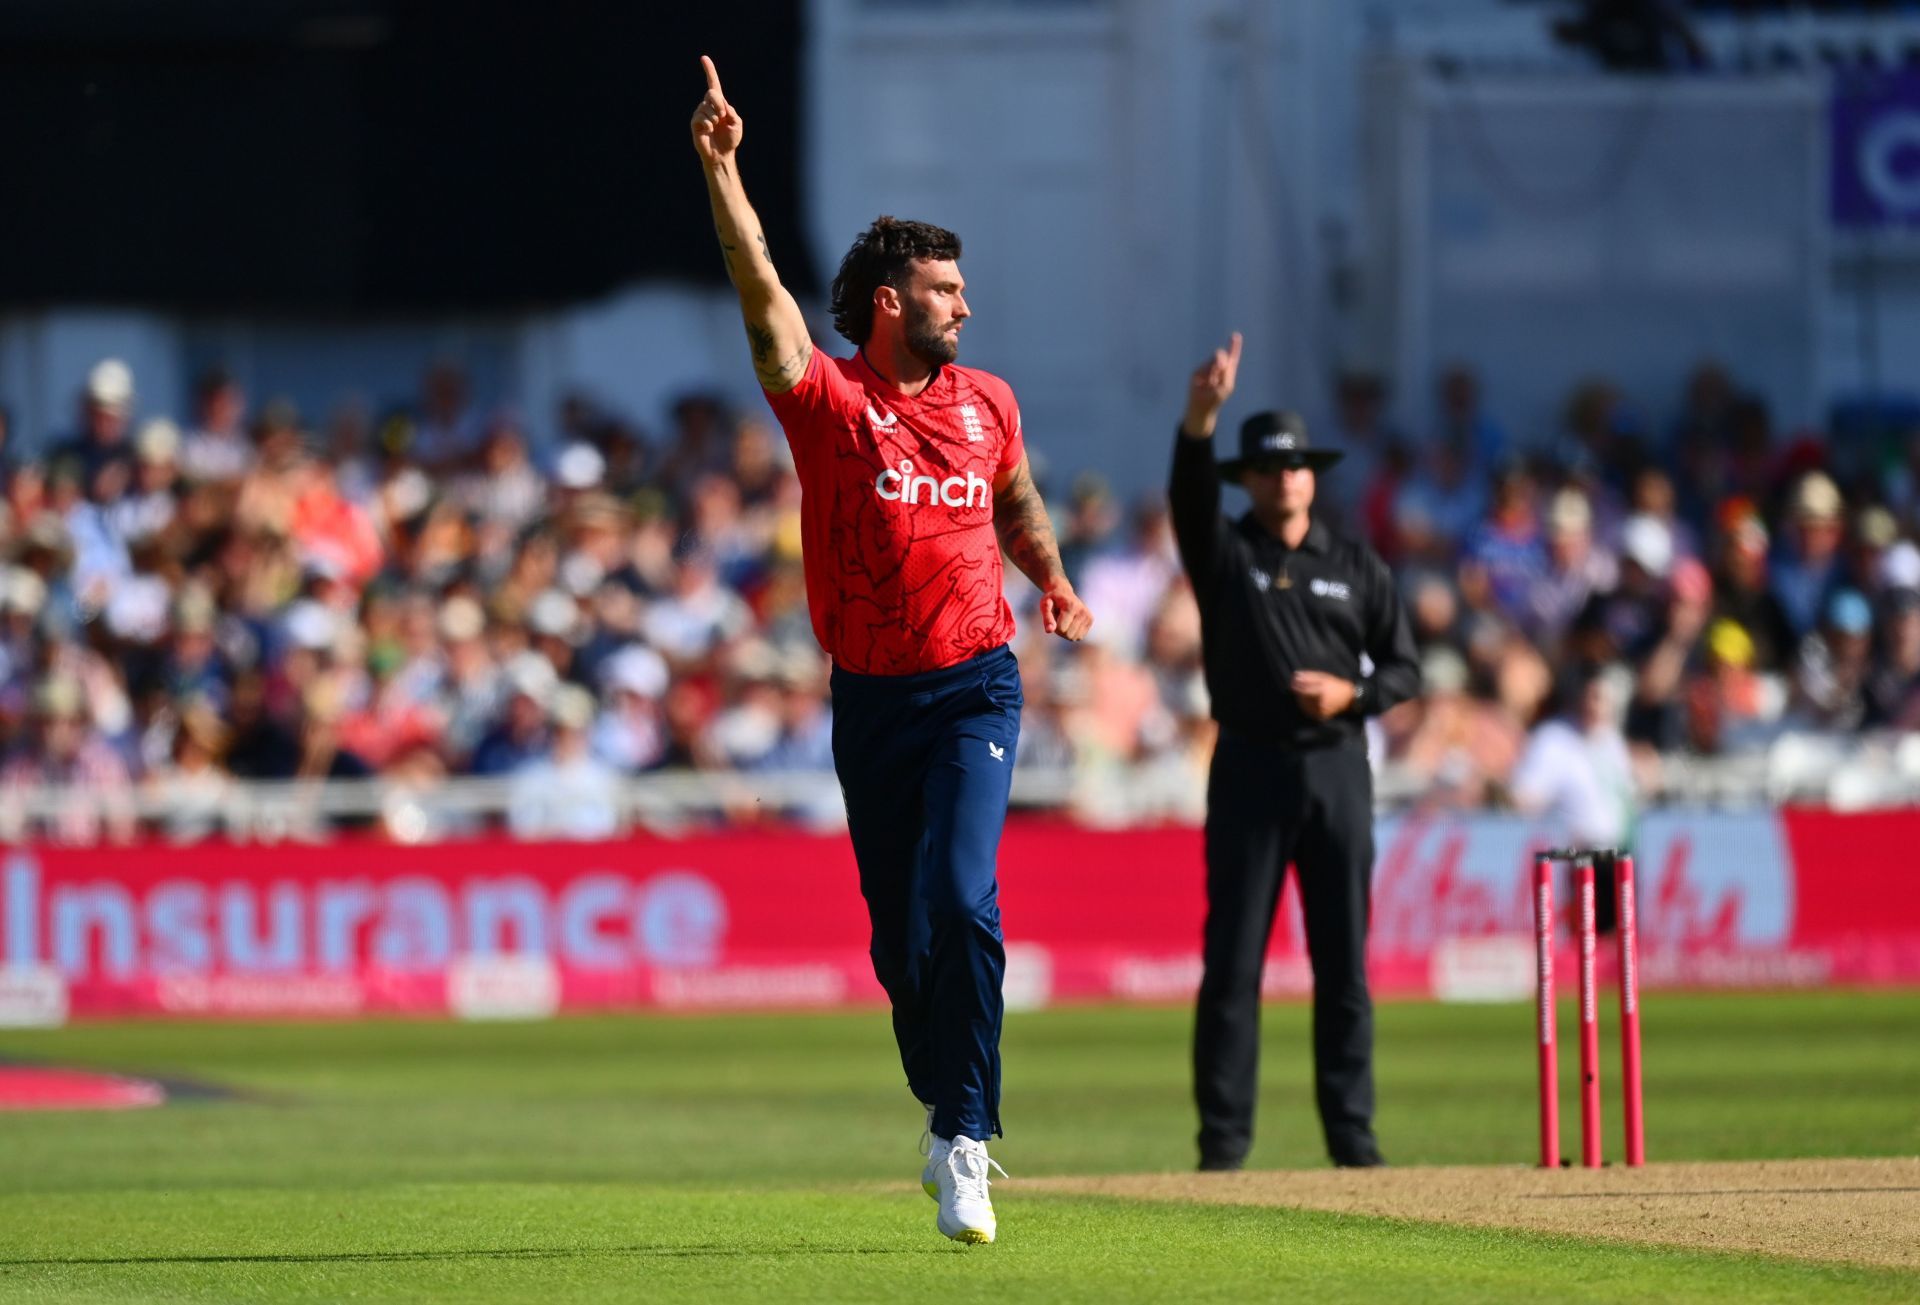 Reece Topley was the pick of the England bowlers.